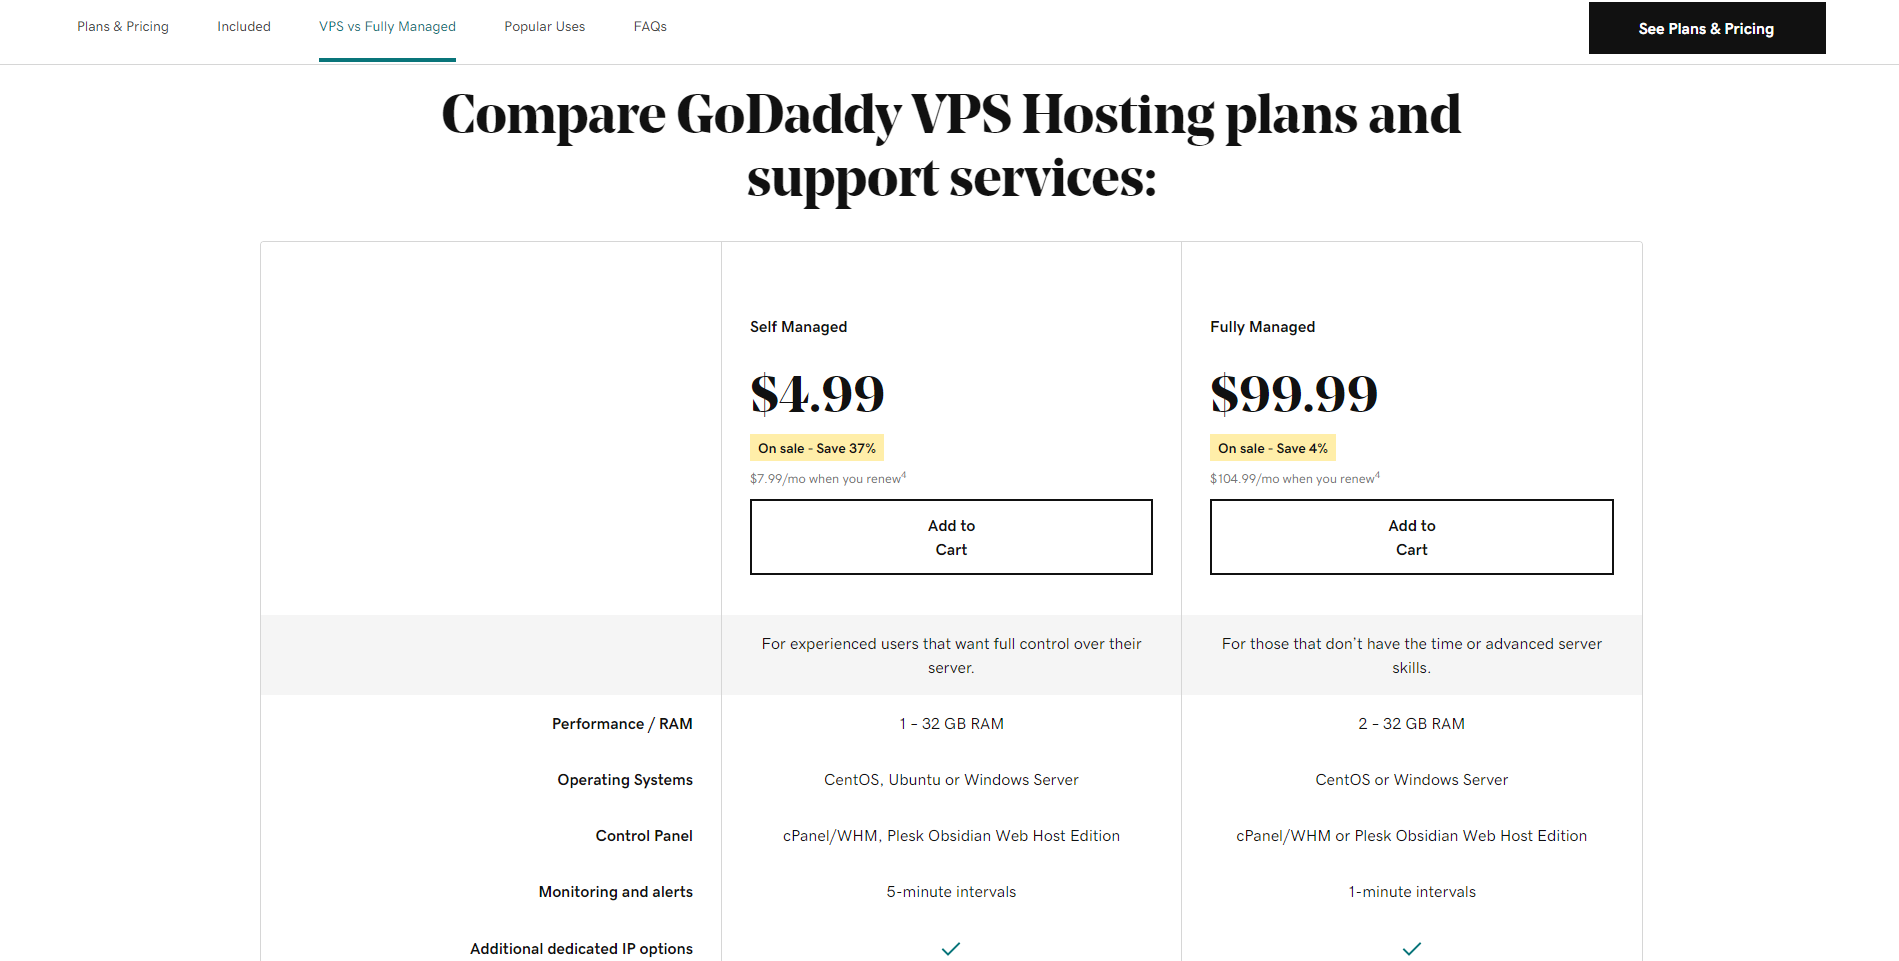 GoDaddy's VPS features and two prices for self managed and fully managed.